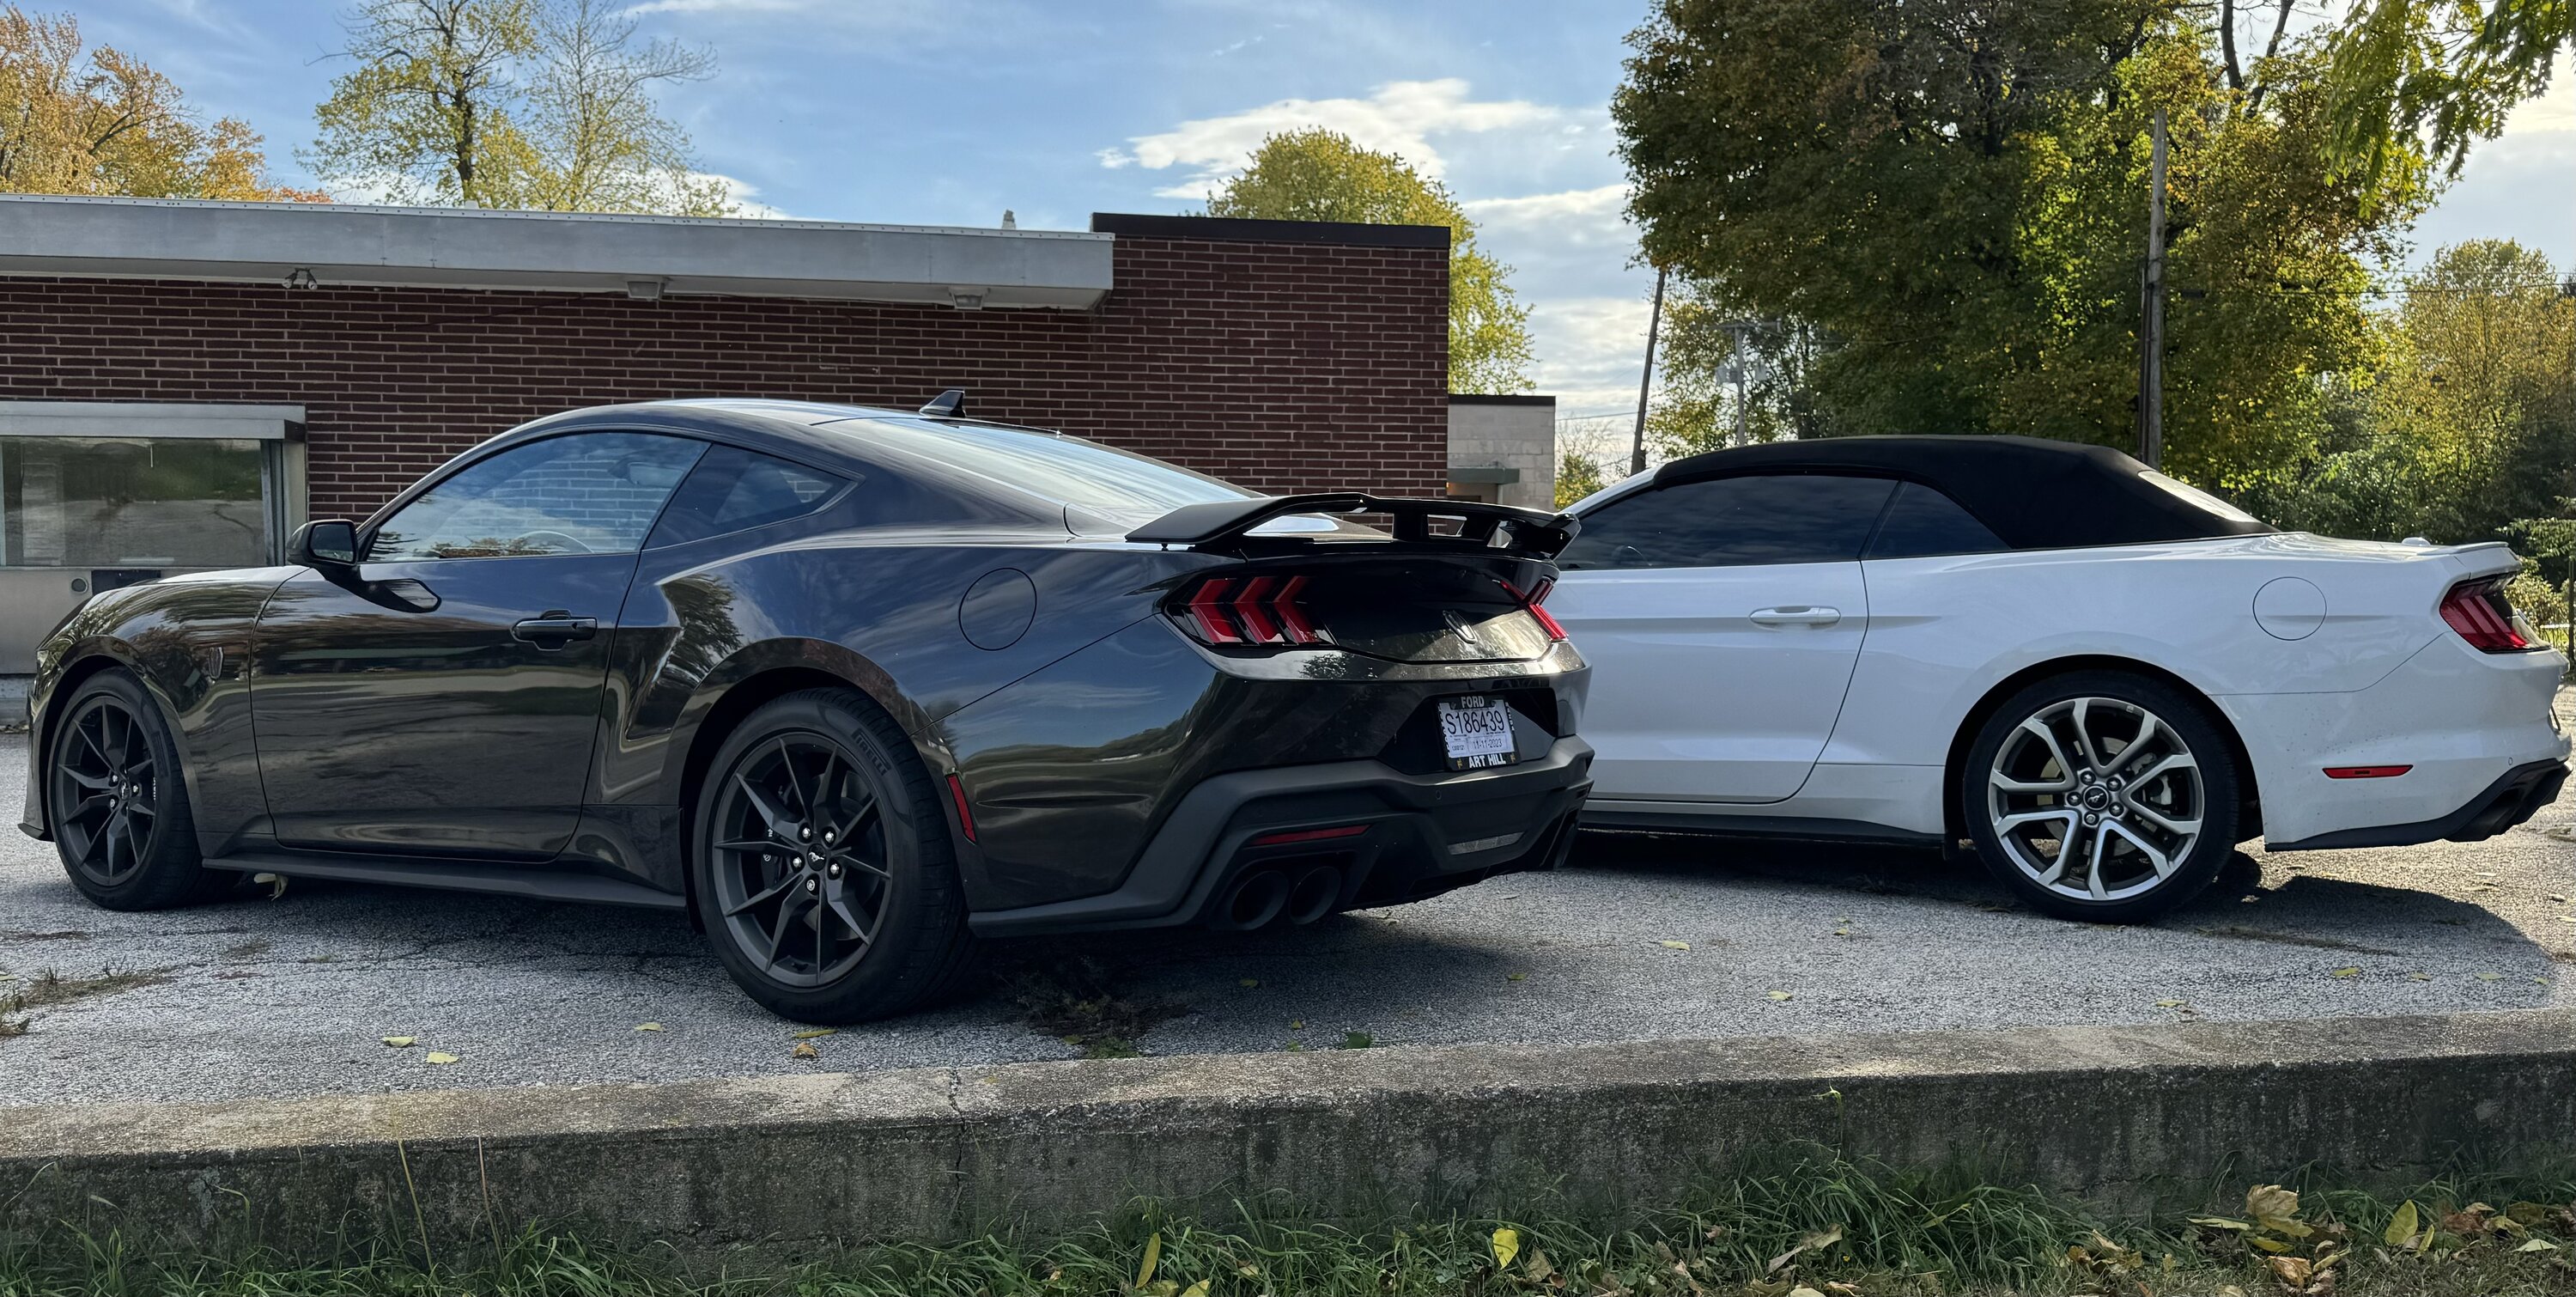 S650 Mustang Ended up with a Dark horse IMG_2929